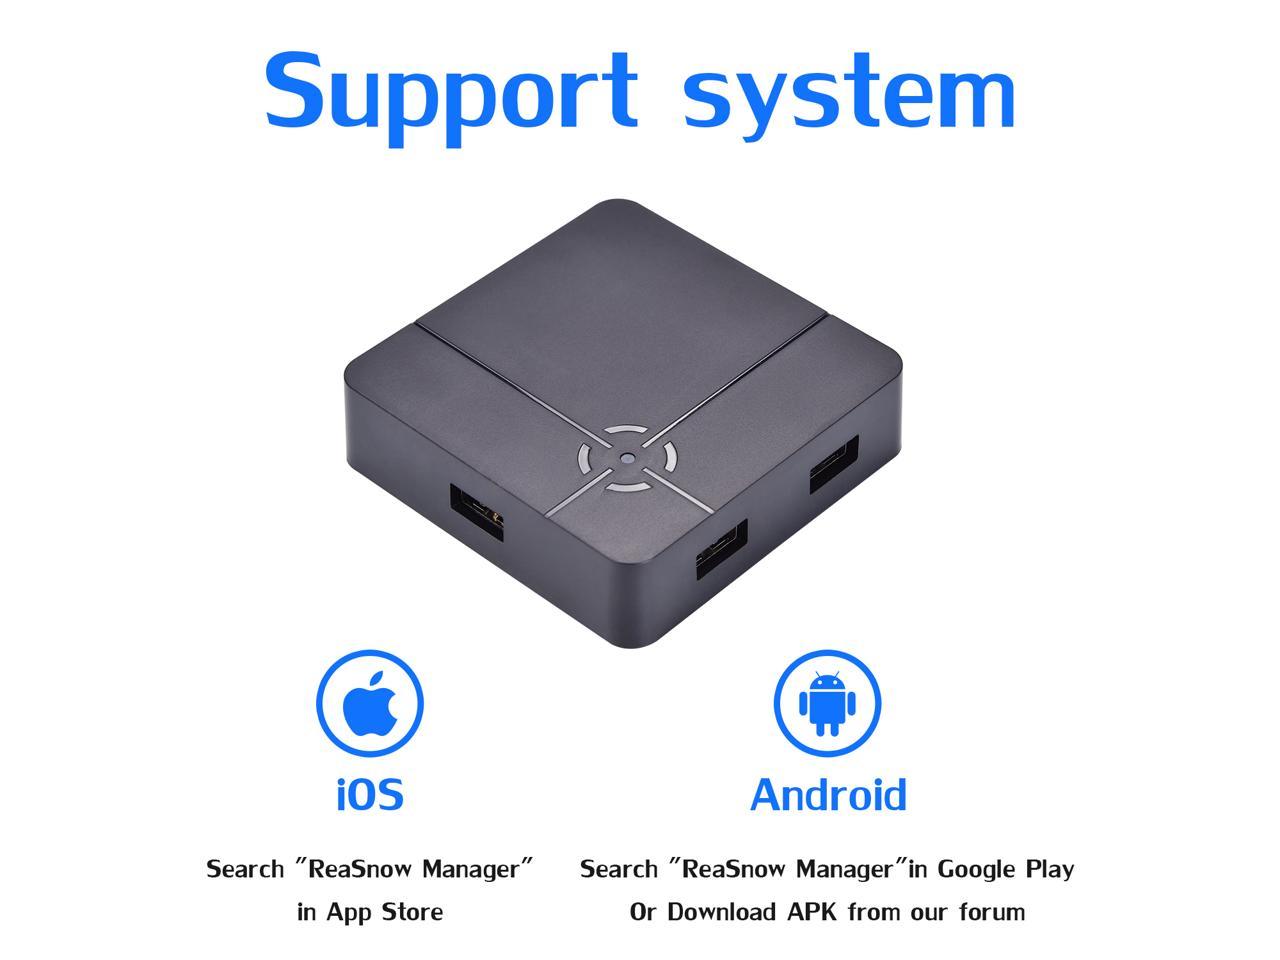 ReaSnow S1 Converter For PS4 Pro/PS4 Slim/PS4/PS3/Xbox One X/Xbox One  S/Xbox One/XBox 360/Nintendo Switch